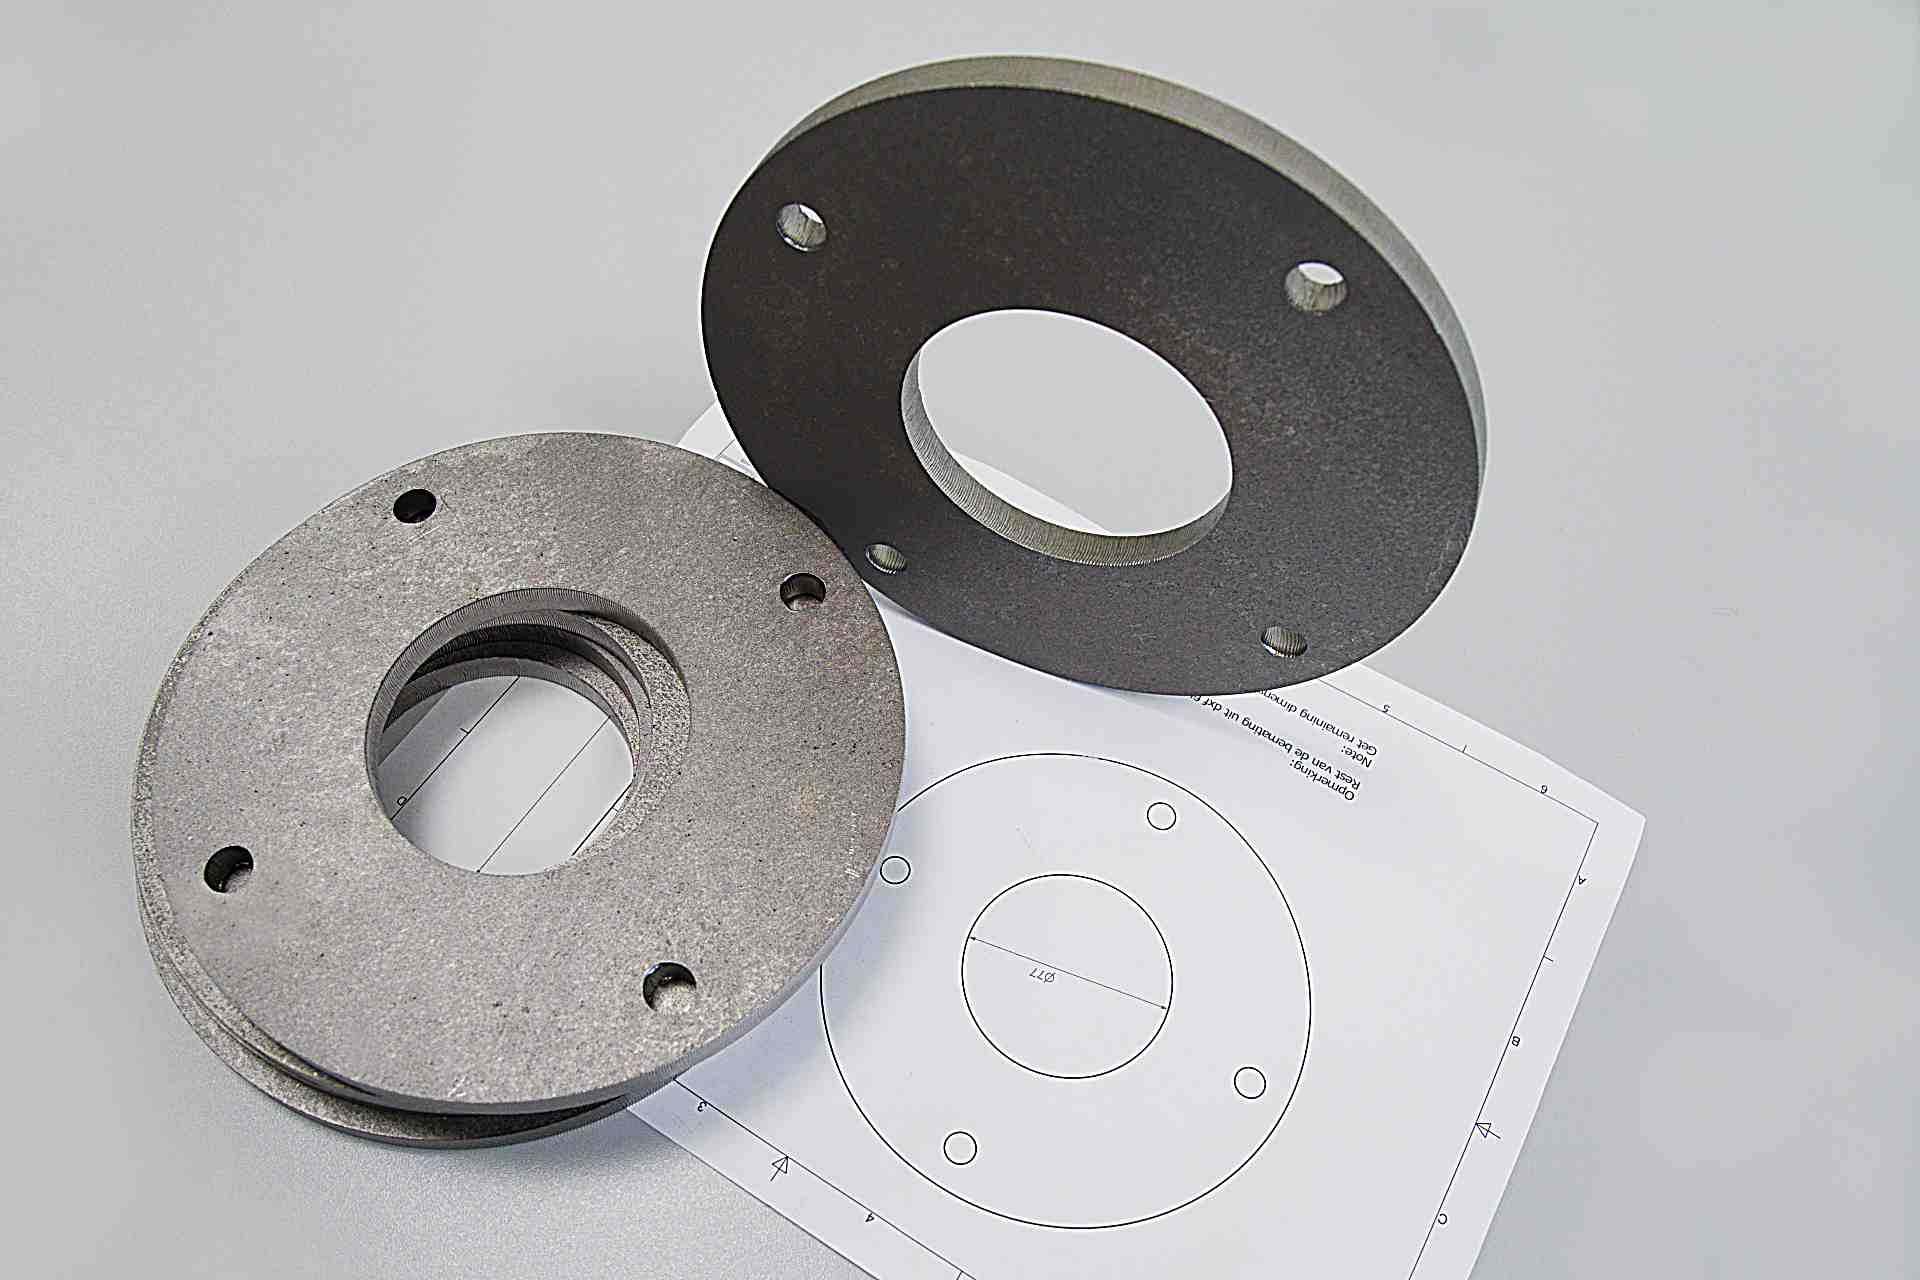 Turned parts - flanges